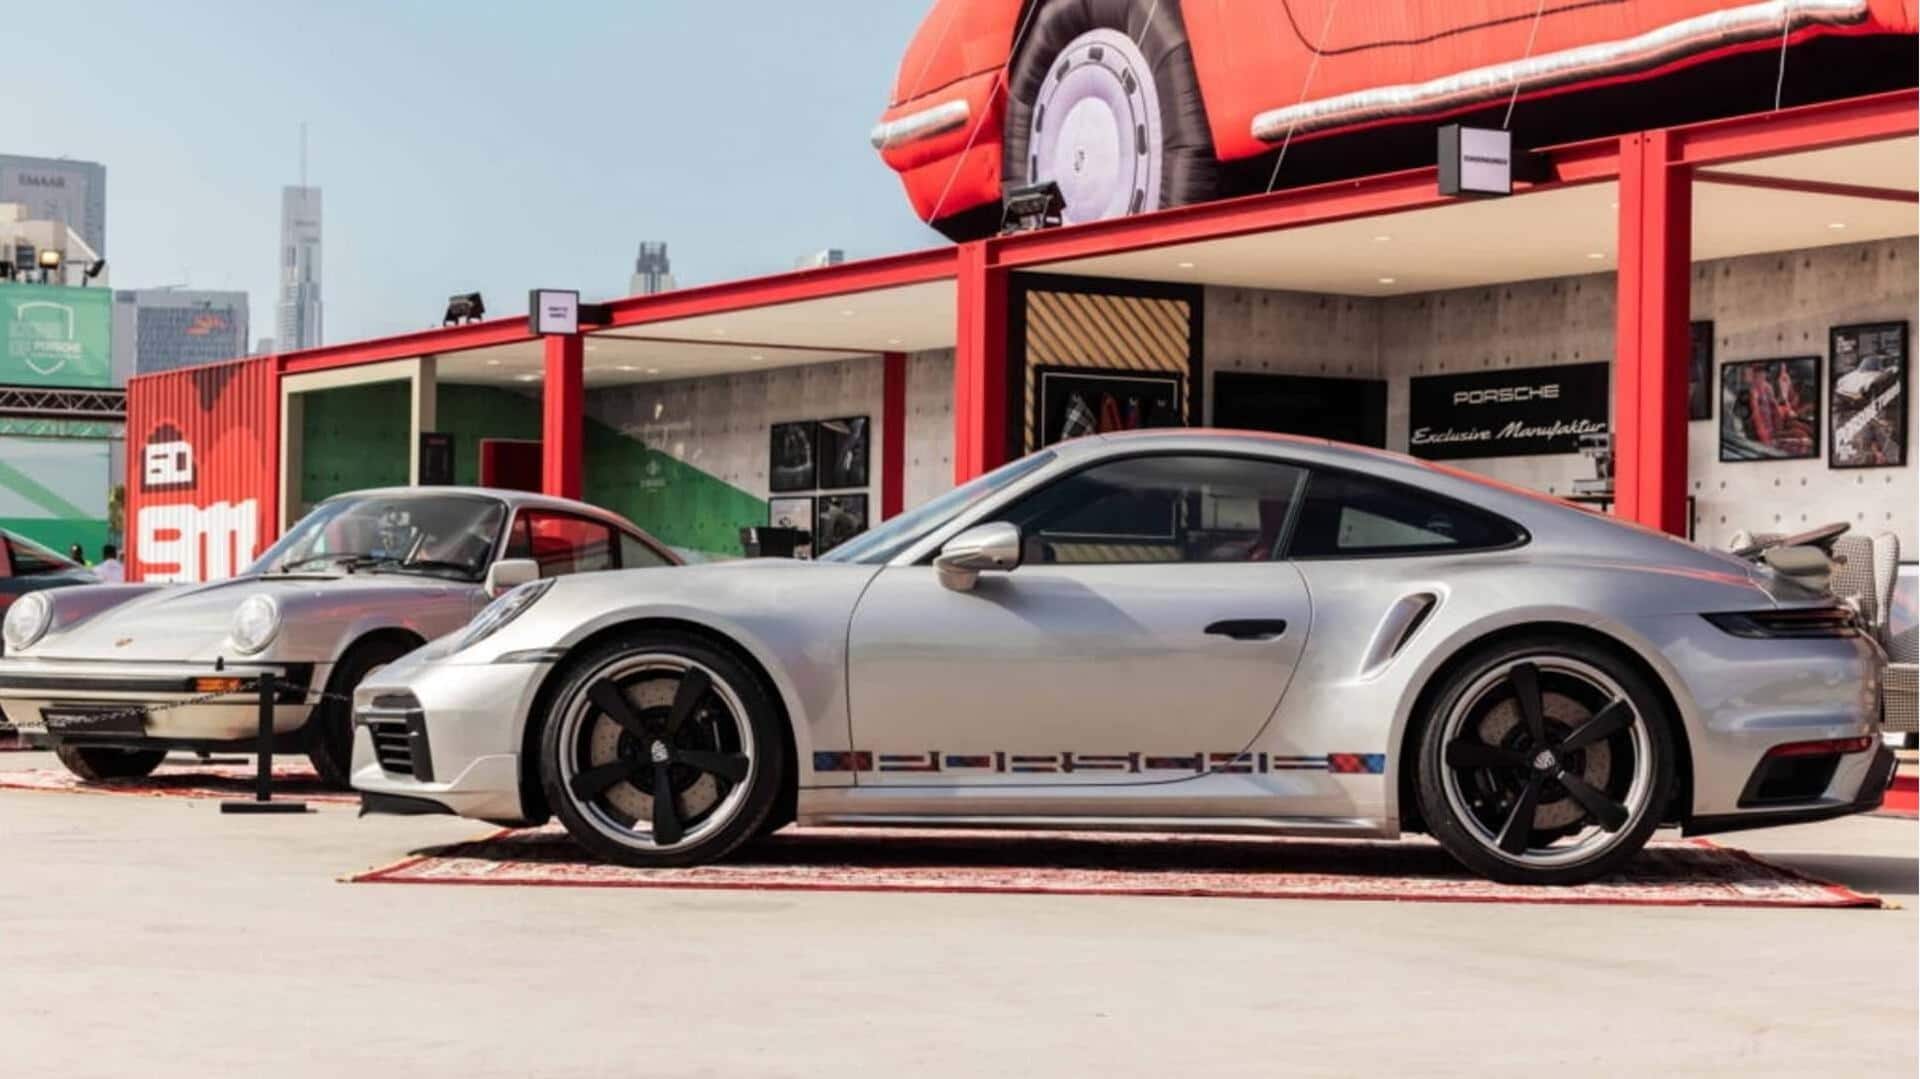 Porsche celebrates first 911 Turbo model with a special one-off 